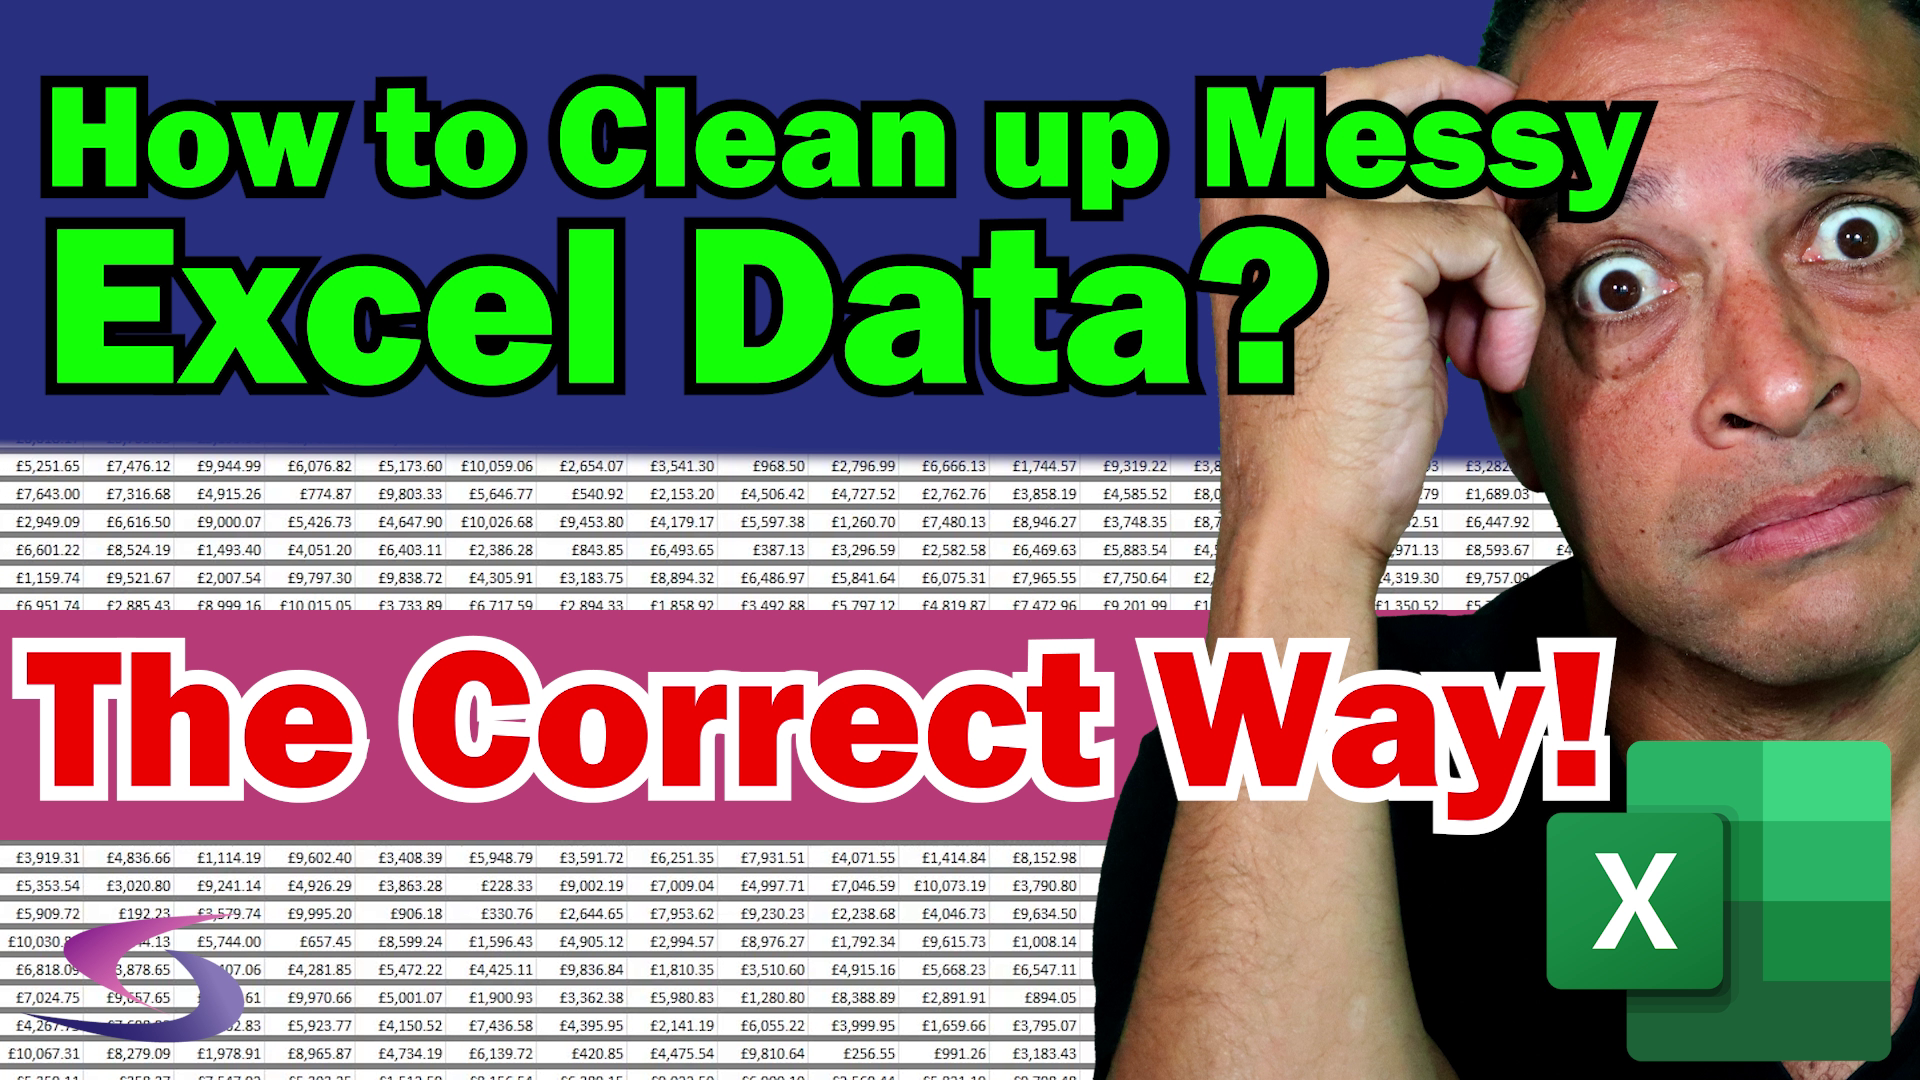 How to clean up messy data in Excel for Quick Analysis the correct way?